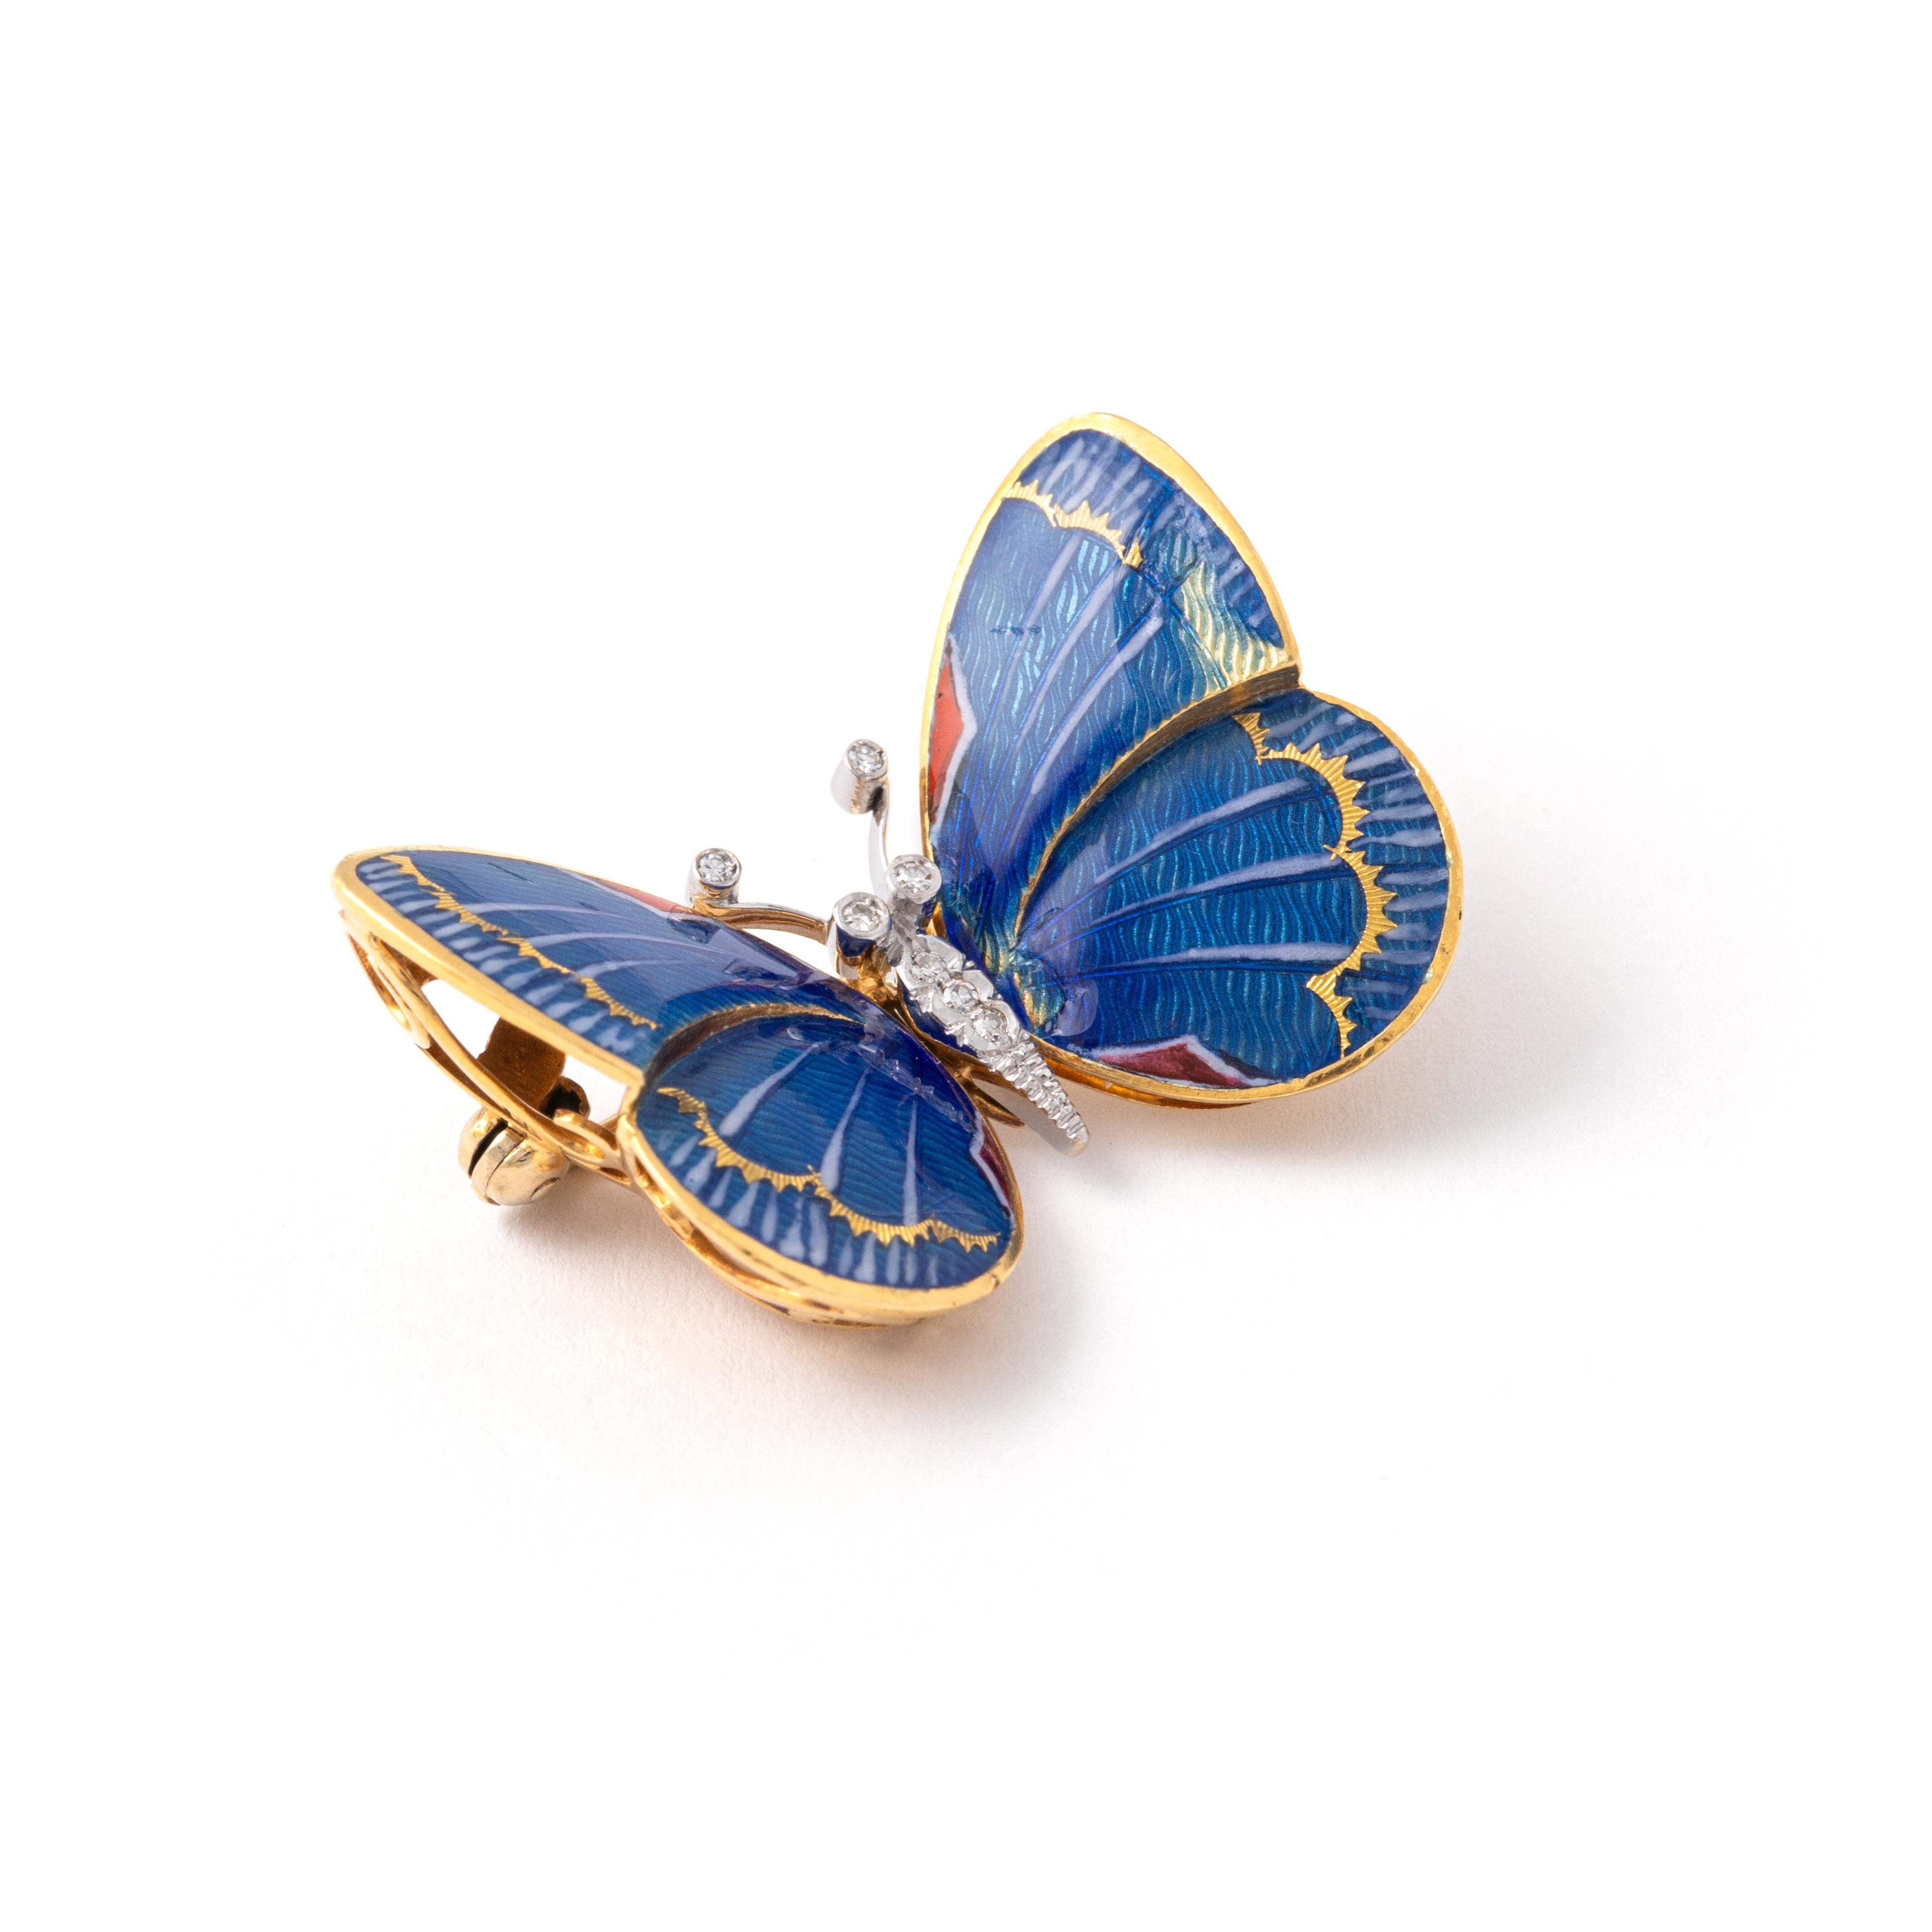 Butterfly Diamond Enamel Gold 18K Pendant convertible Brooch.
Wings are movable.

Total length: approx. 1.40 centimeters / 0.55 inch.
Total width: approx. 3.20 centimeters / 1.26 inches.